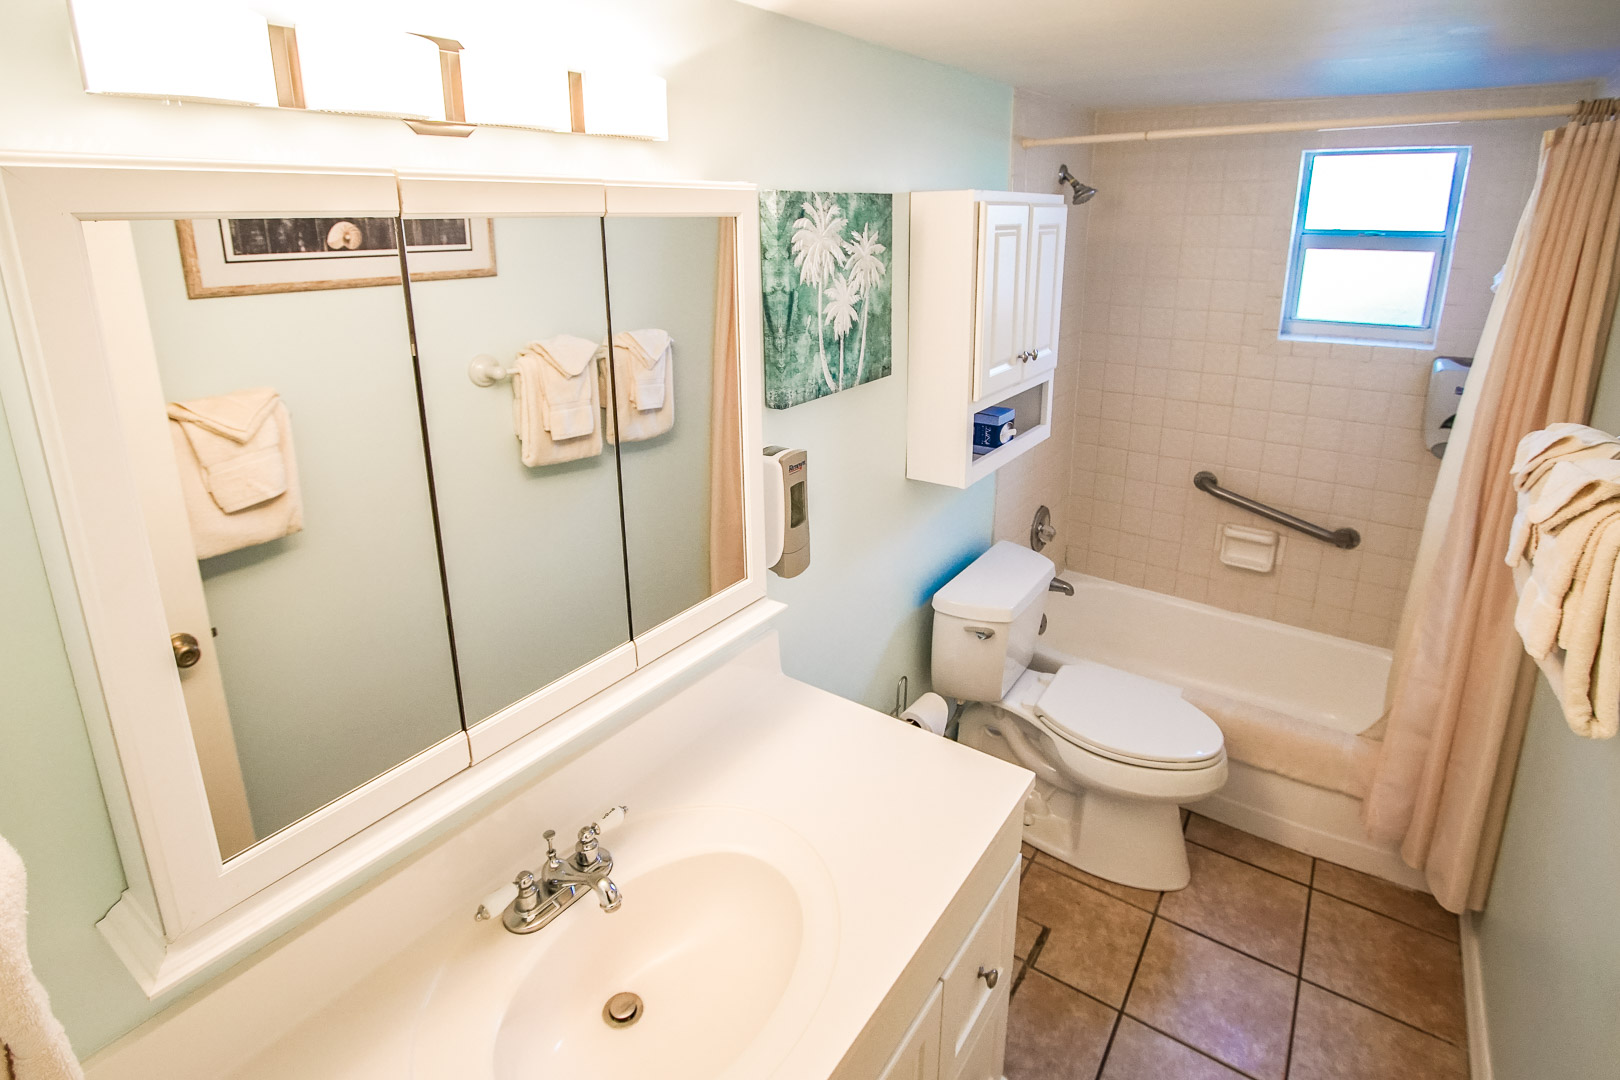 A clean bathroom at VRI's Sand Dune Shores in Florida.